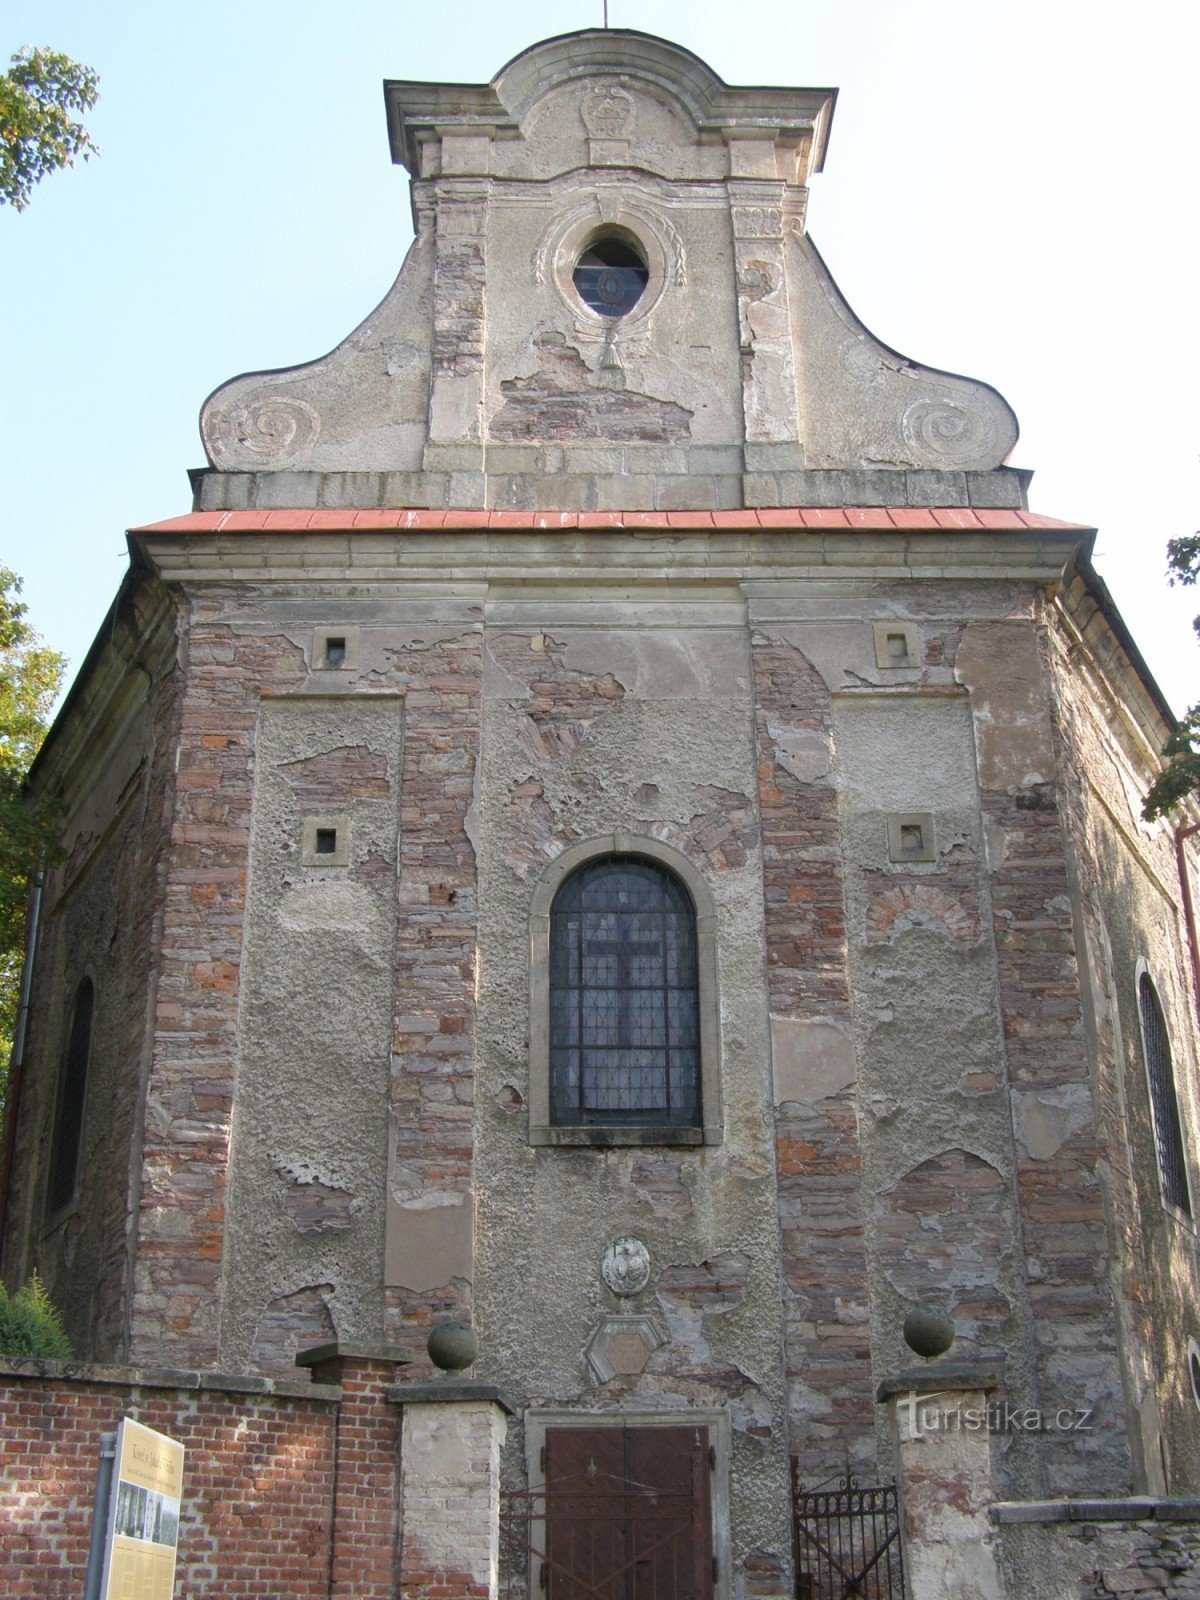 Church of St. James the Greater